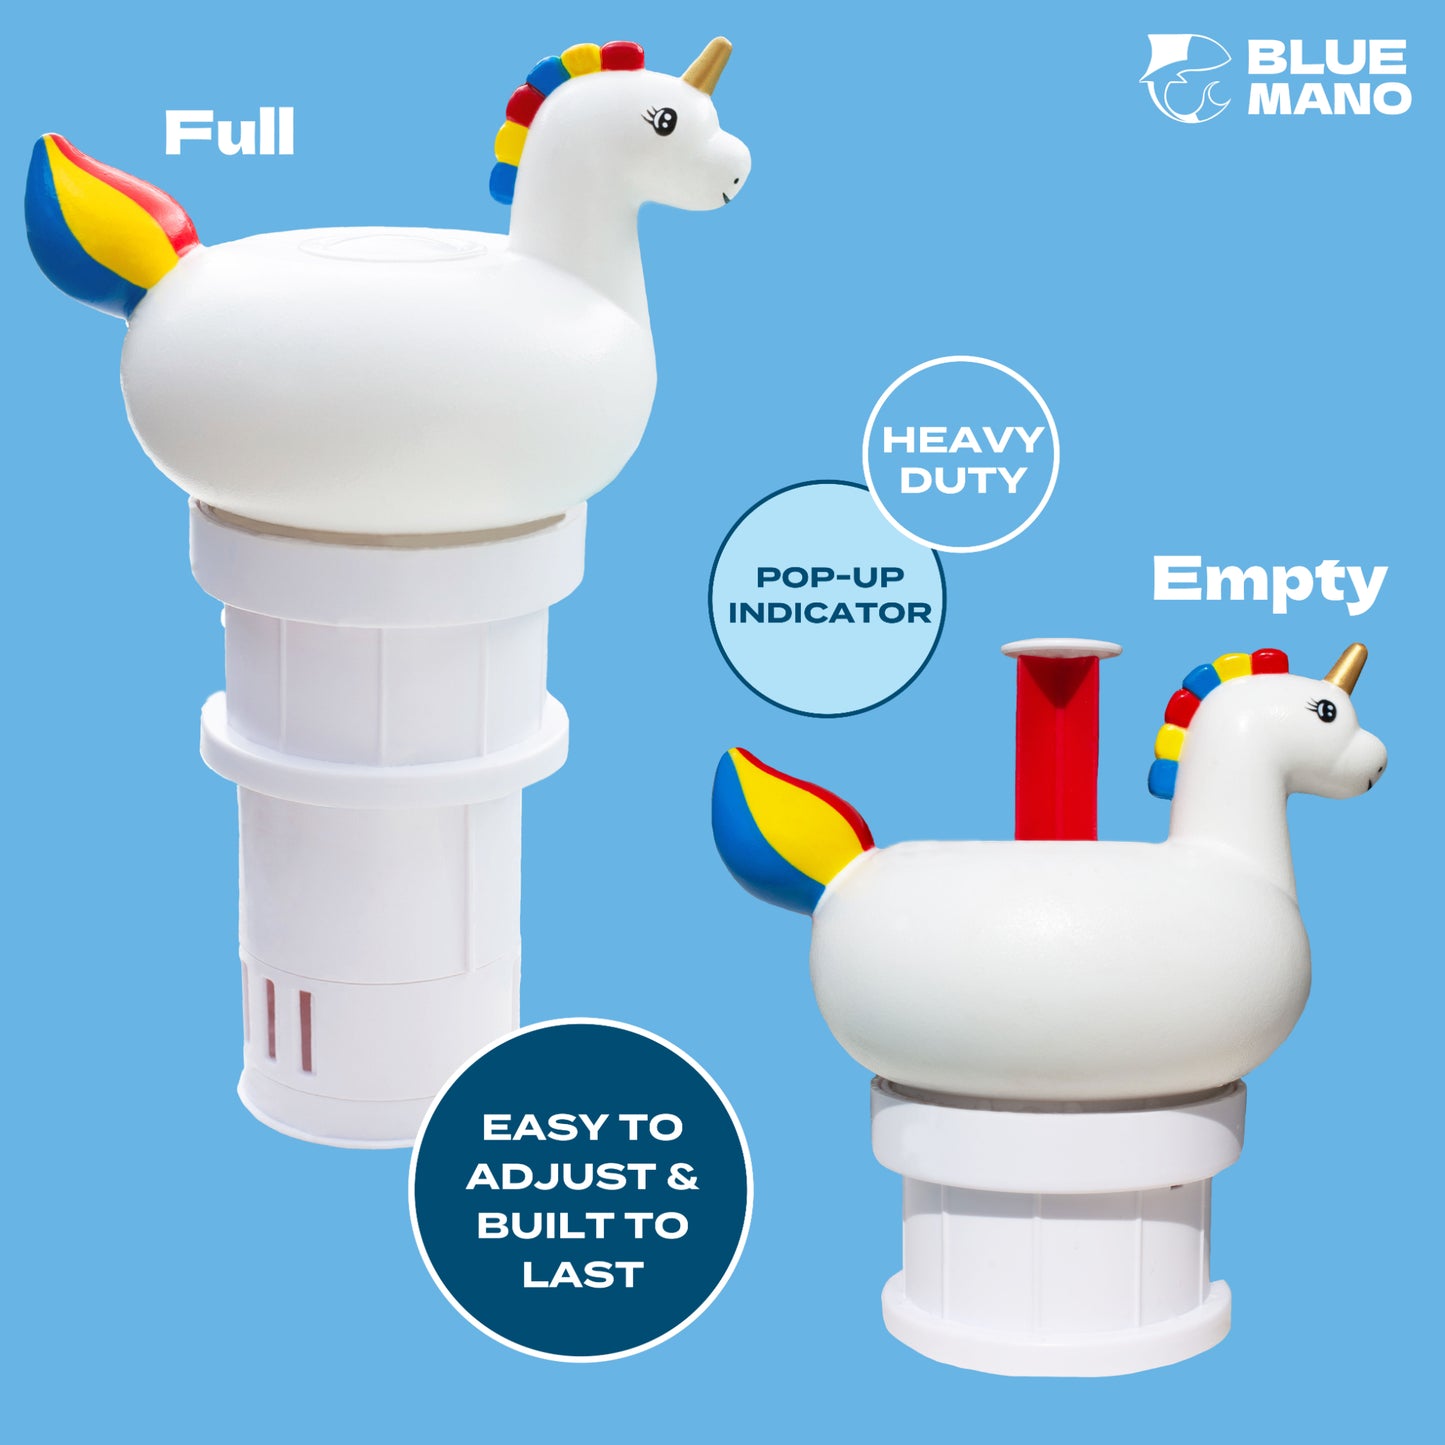 Blue Mano Unicorn Floating Chlorine Dispenser for 3 inch & 1 inch Chlorine Tablets with Refill Warning, Durable Design, Unicorn Floater & Dispenser for Inground and Above Ground Swimming Pool